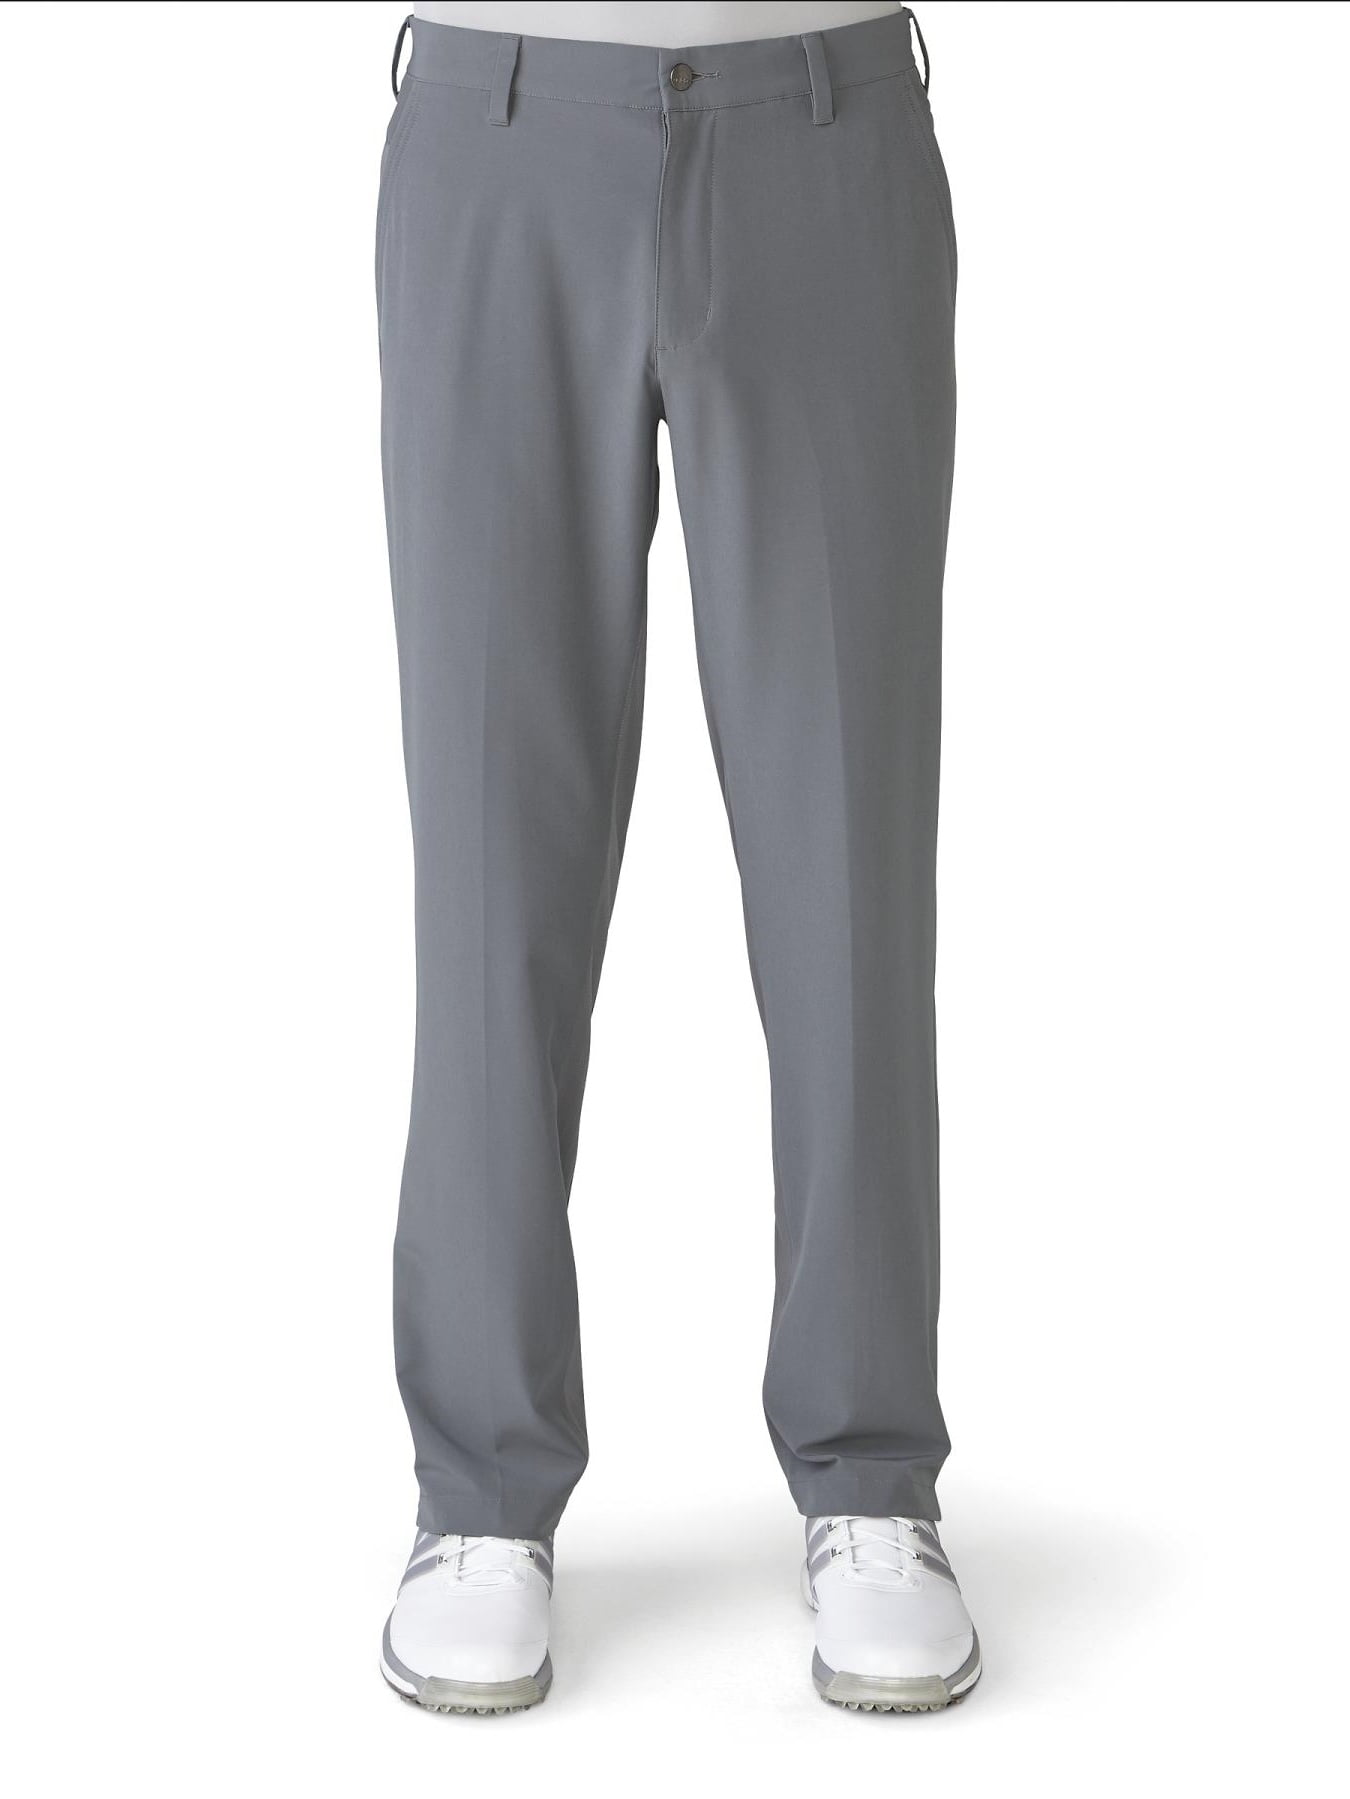 adidas climacool trousers mens